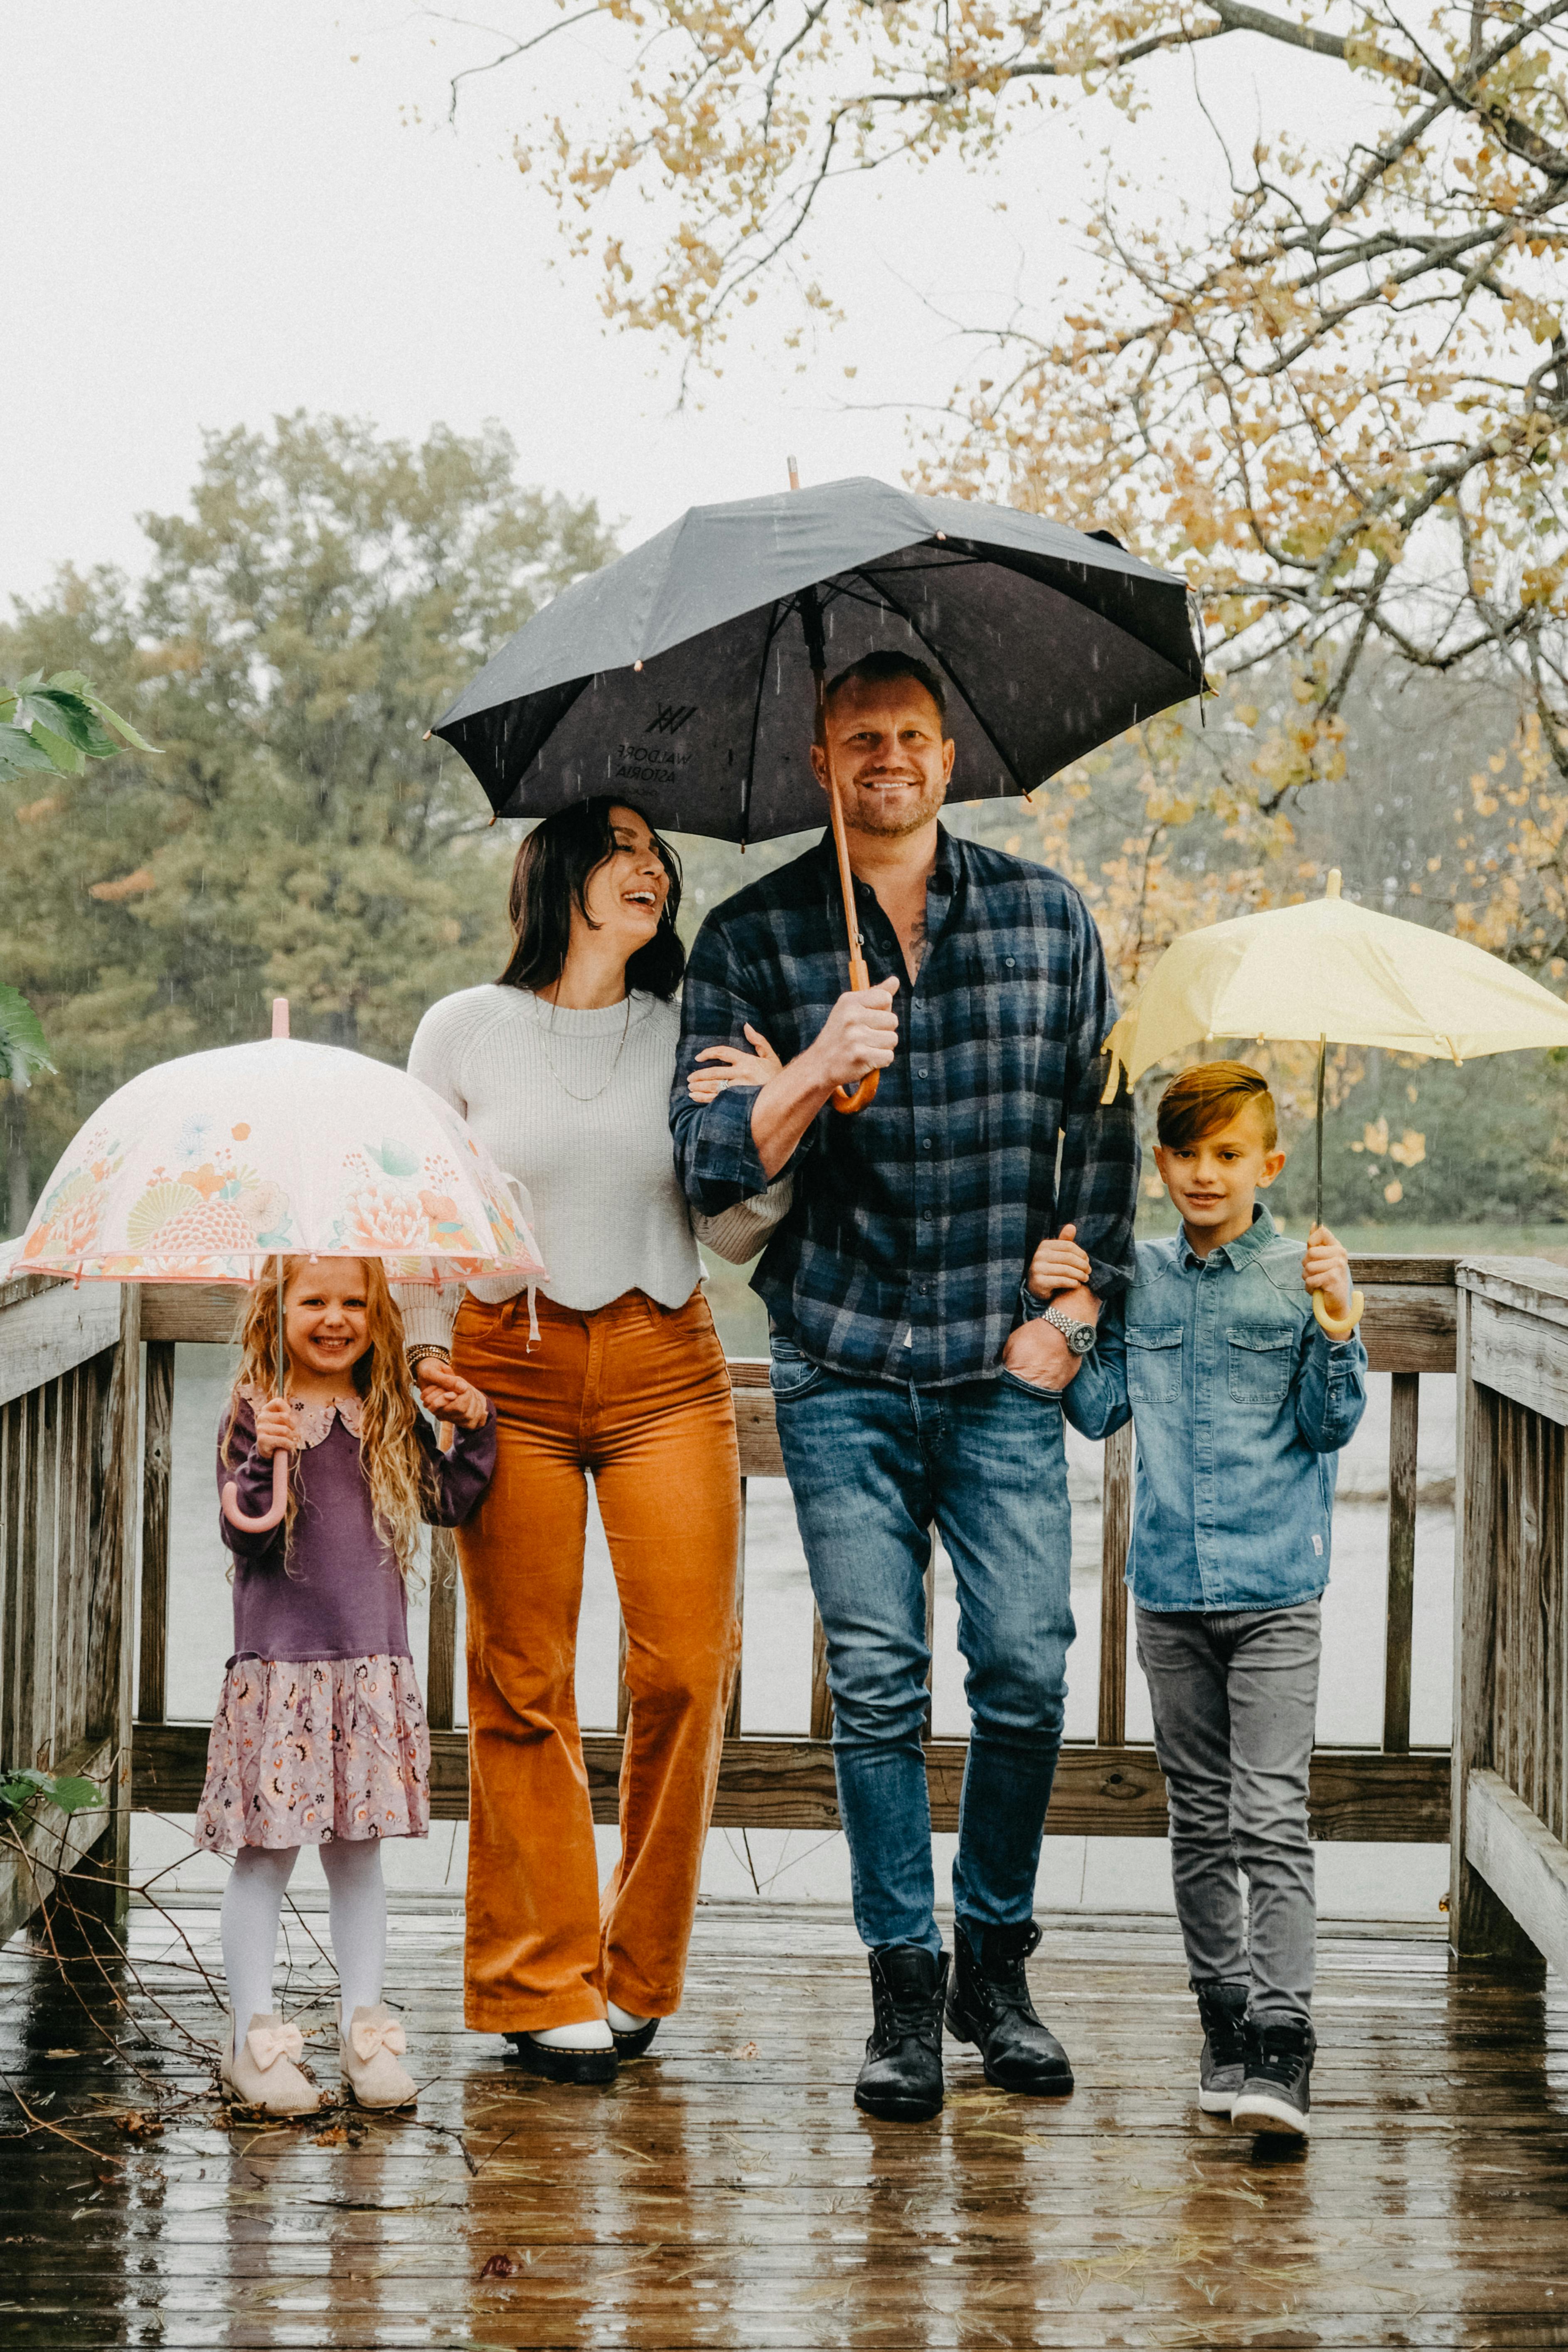 A family of four with umbrellas smiling and walking on a wooden bridge in the rain.